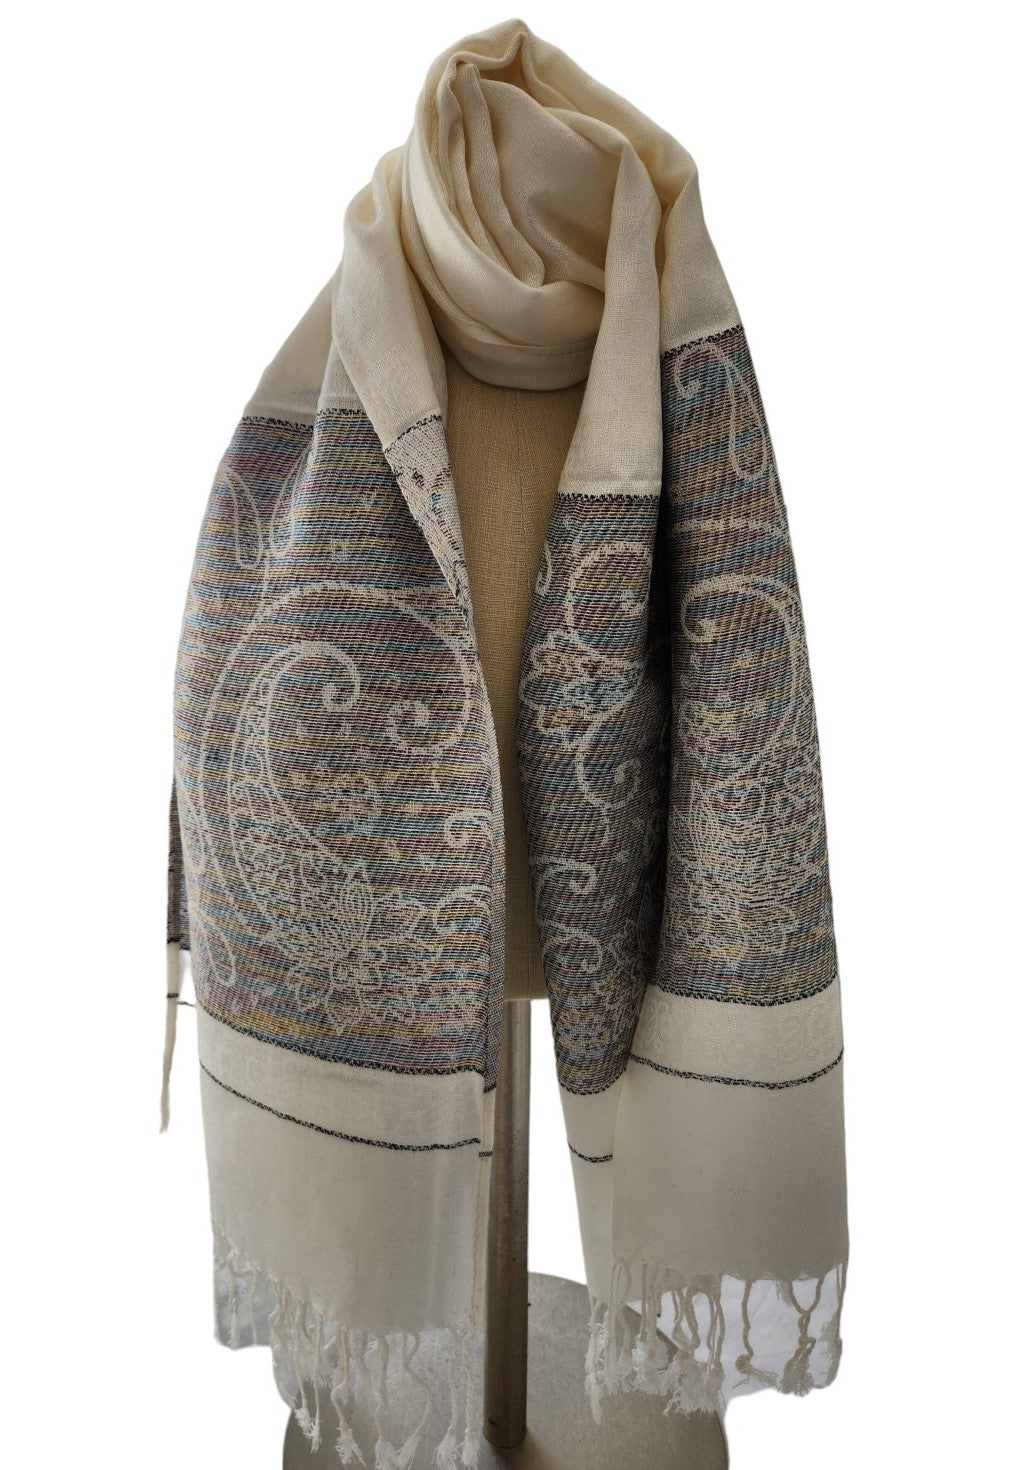 Women's Lightweight Pashmina Floral Paisley Scarves or Wrap - Perfect for Warmer Weather and Change in Seasons